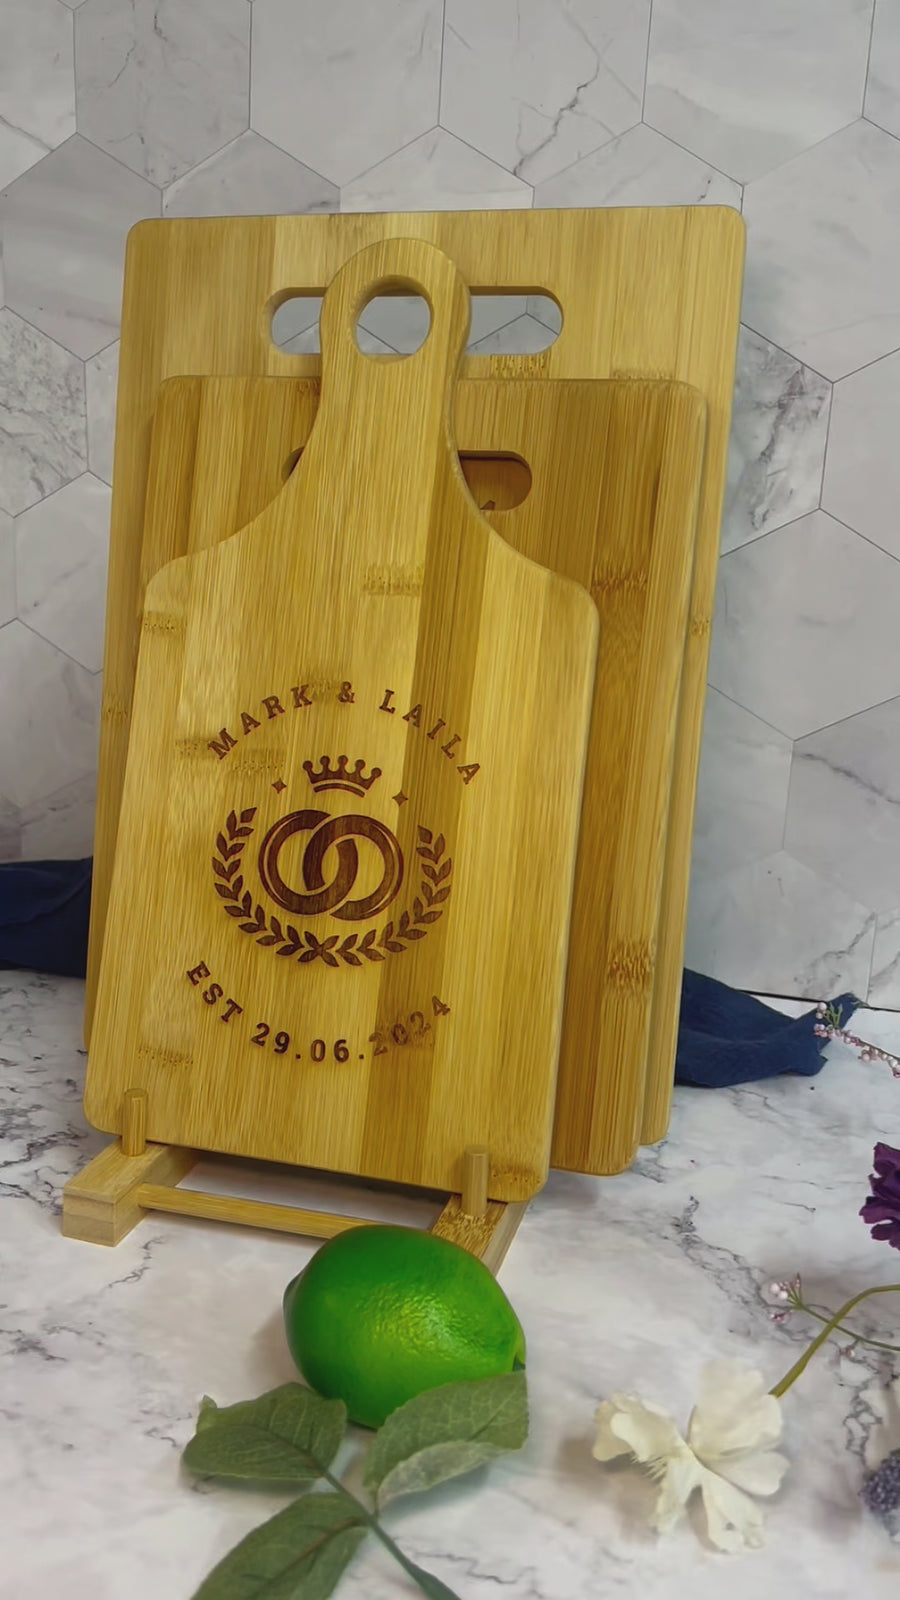 Personalised 3 Bamboo Chopping Boards & Stand Set Custom Engraved Wooden Cutting Paddle Tray Charcuterie Platter Housewarming Corporate Gift